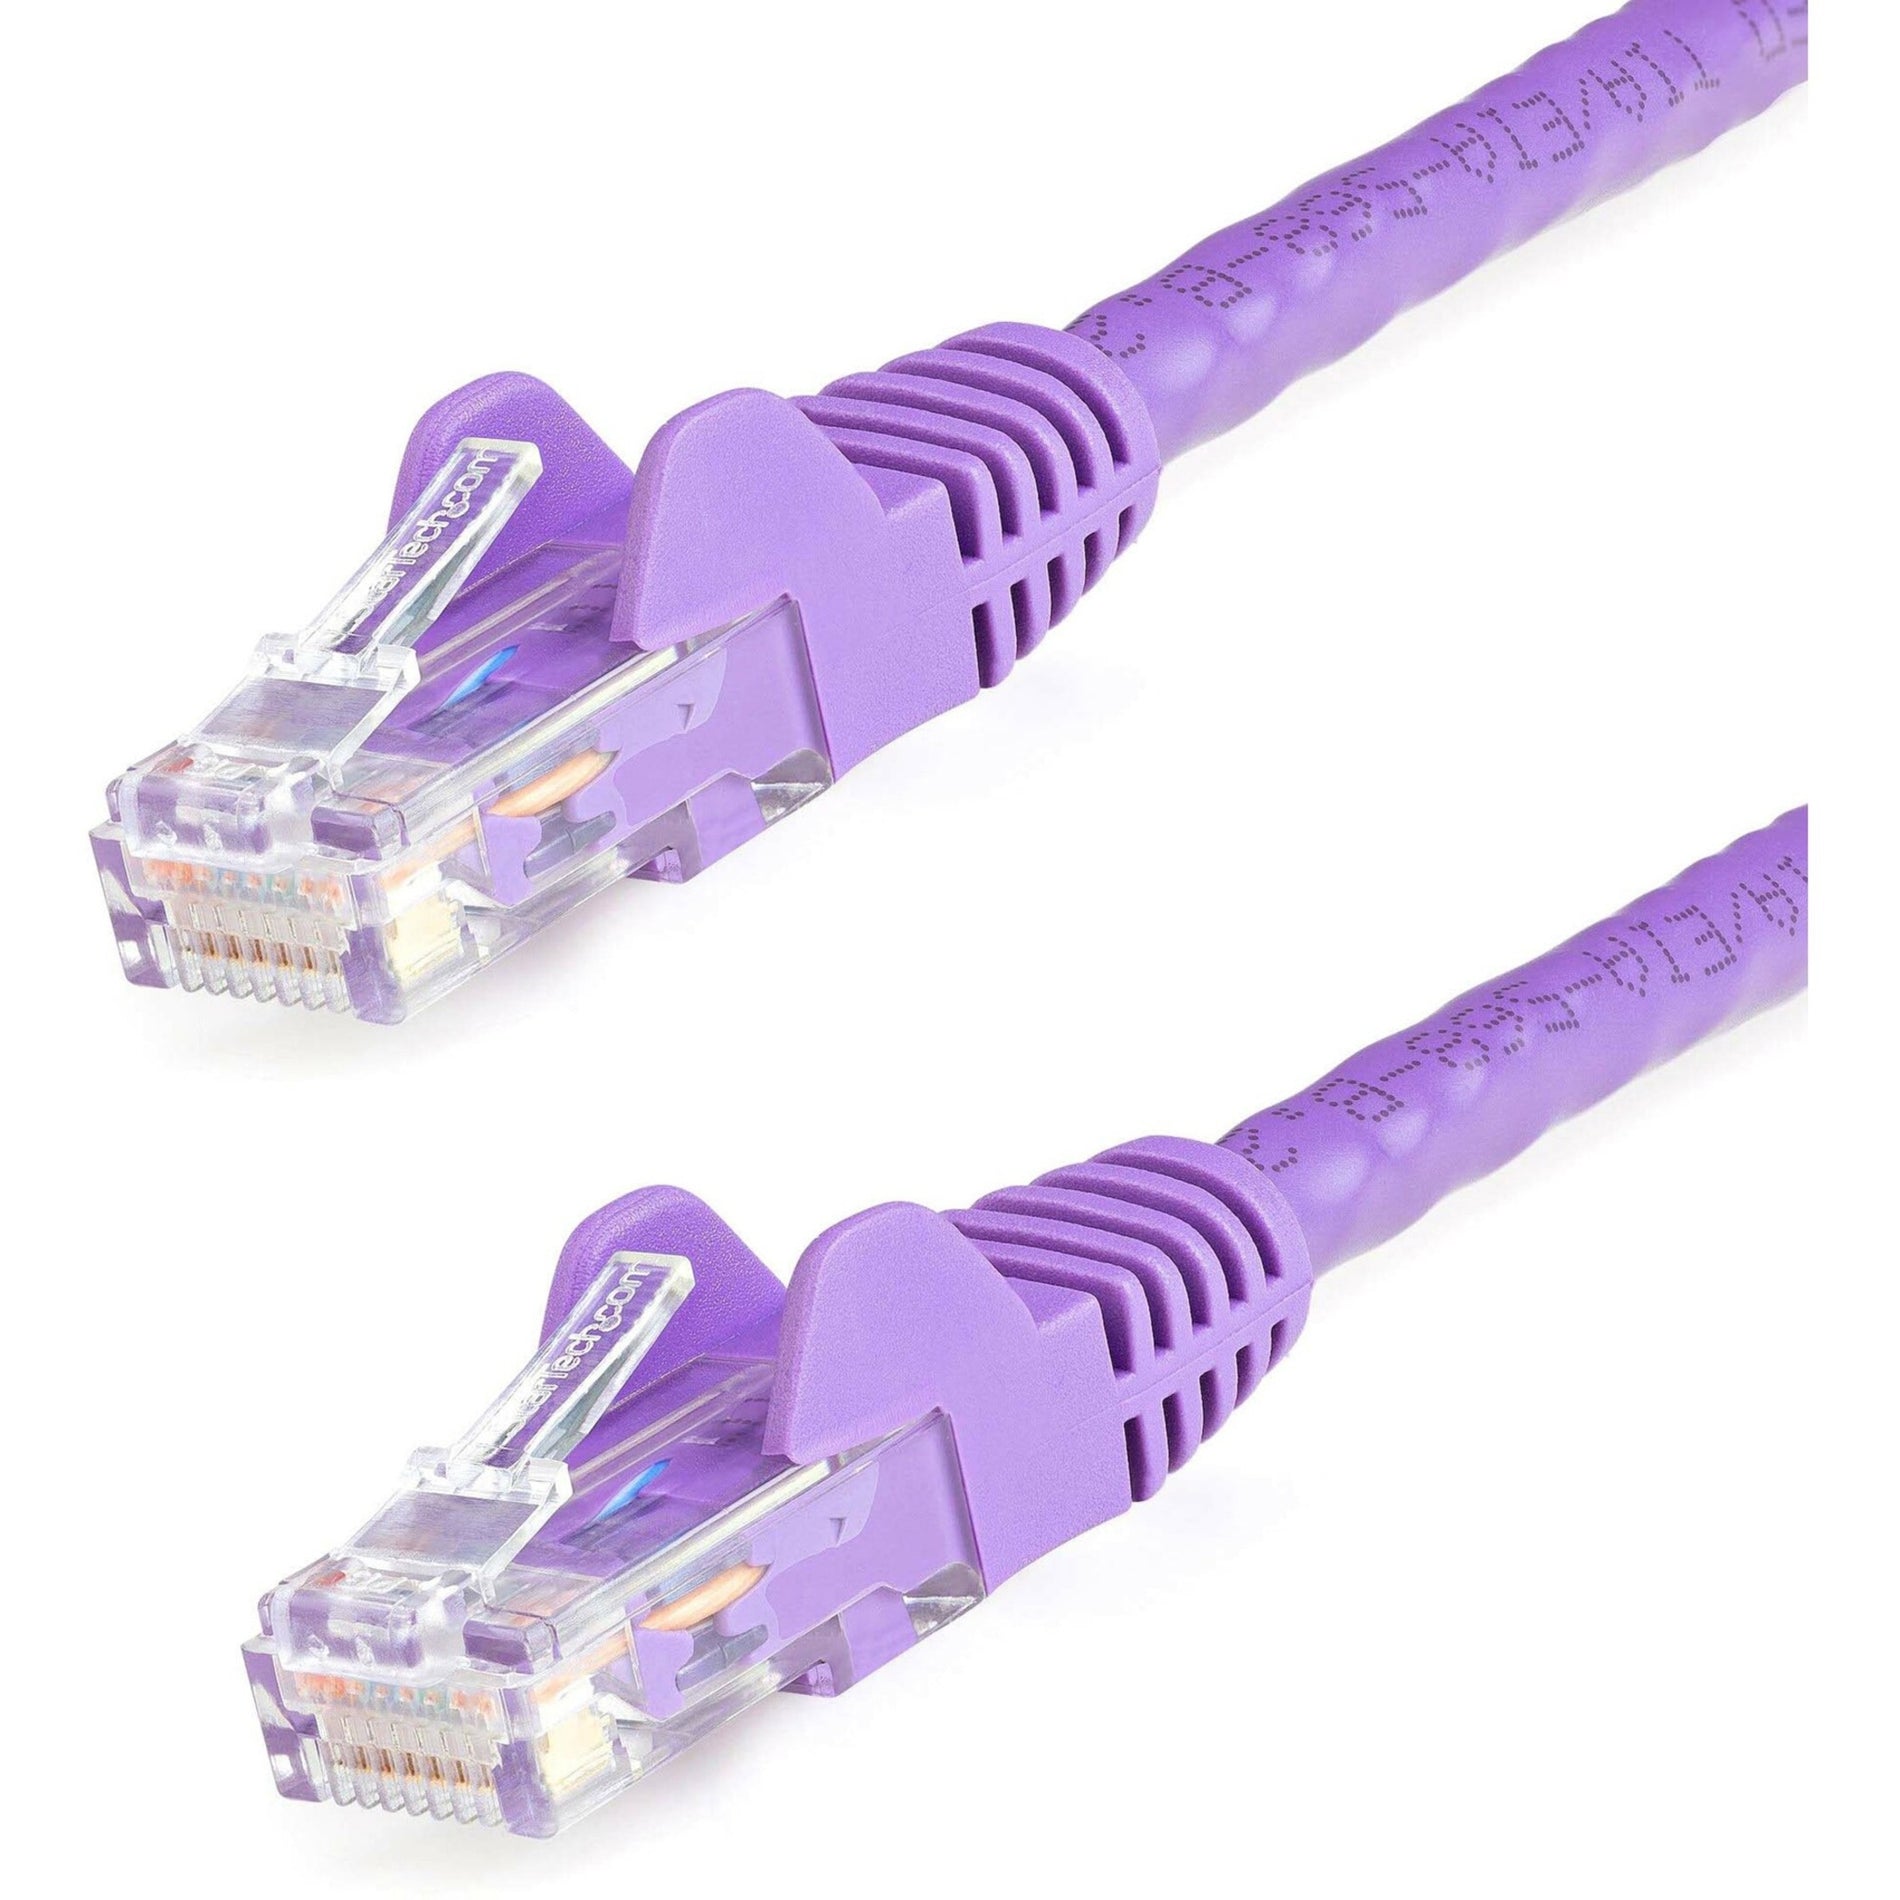 StarTech.com N6PATCH100PL 100 ft Purple Snagless Cat6 UTP Patch Cable, Fray Resistant, 10 Gbit/s Data Transfer Rate